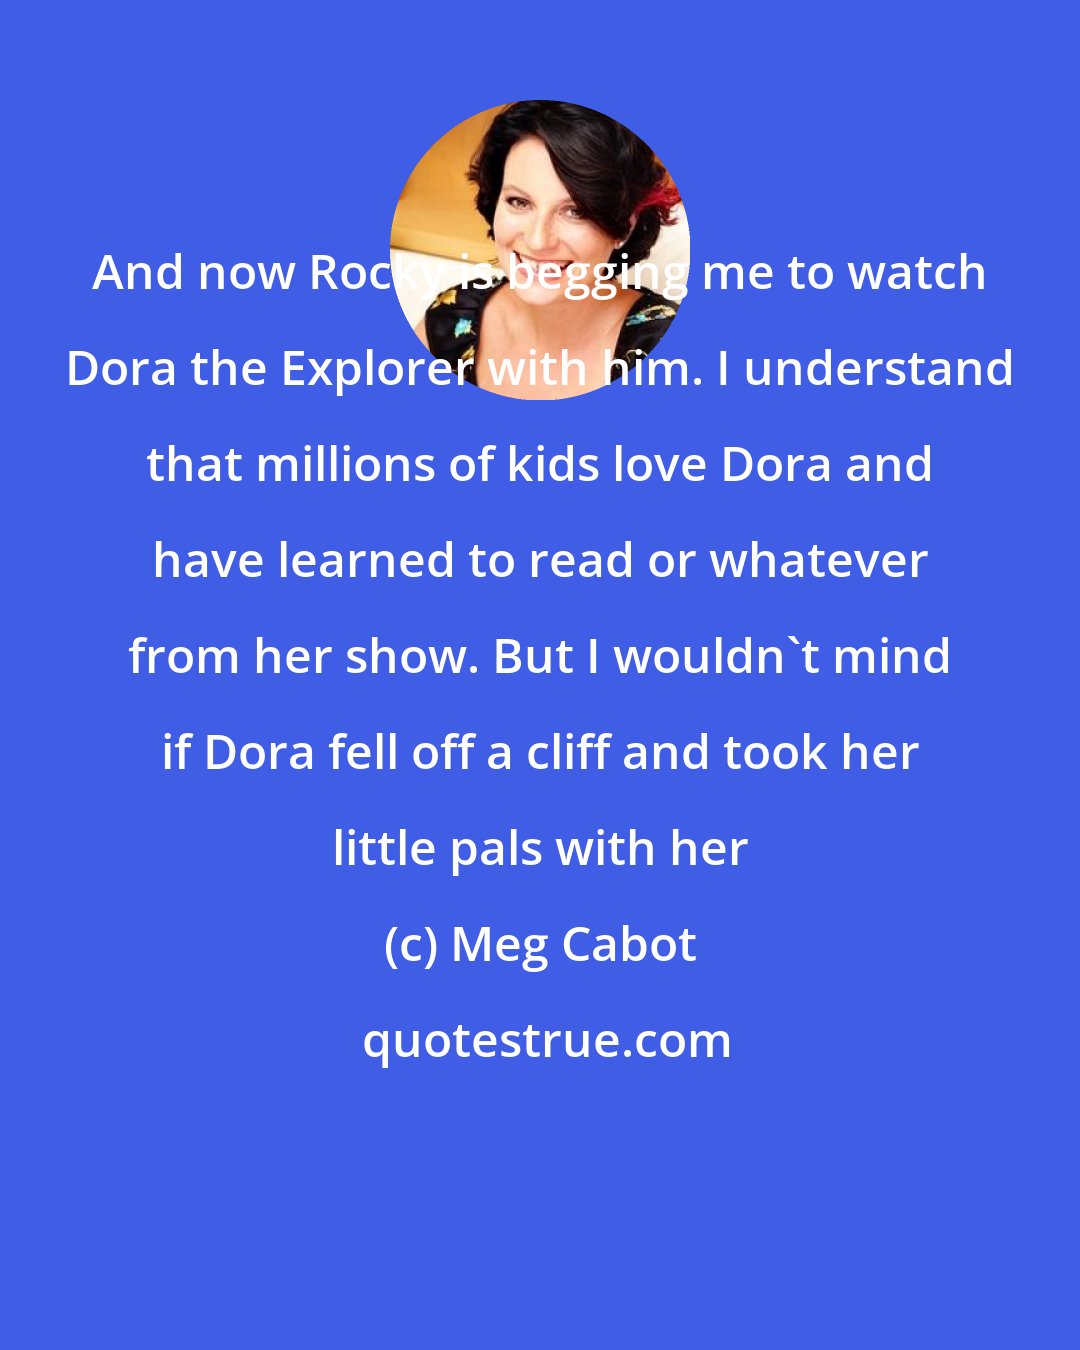 Meg Cabot: And now Rocky is begging me to watch Dora the Explorer with him. I understand that millions of kids love Dora and have learned to read or whatever from her show. But I wouldn't mind if Dora fell off a cliff and took her little pals with her